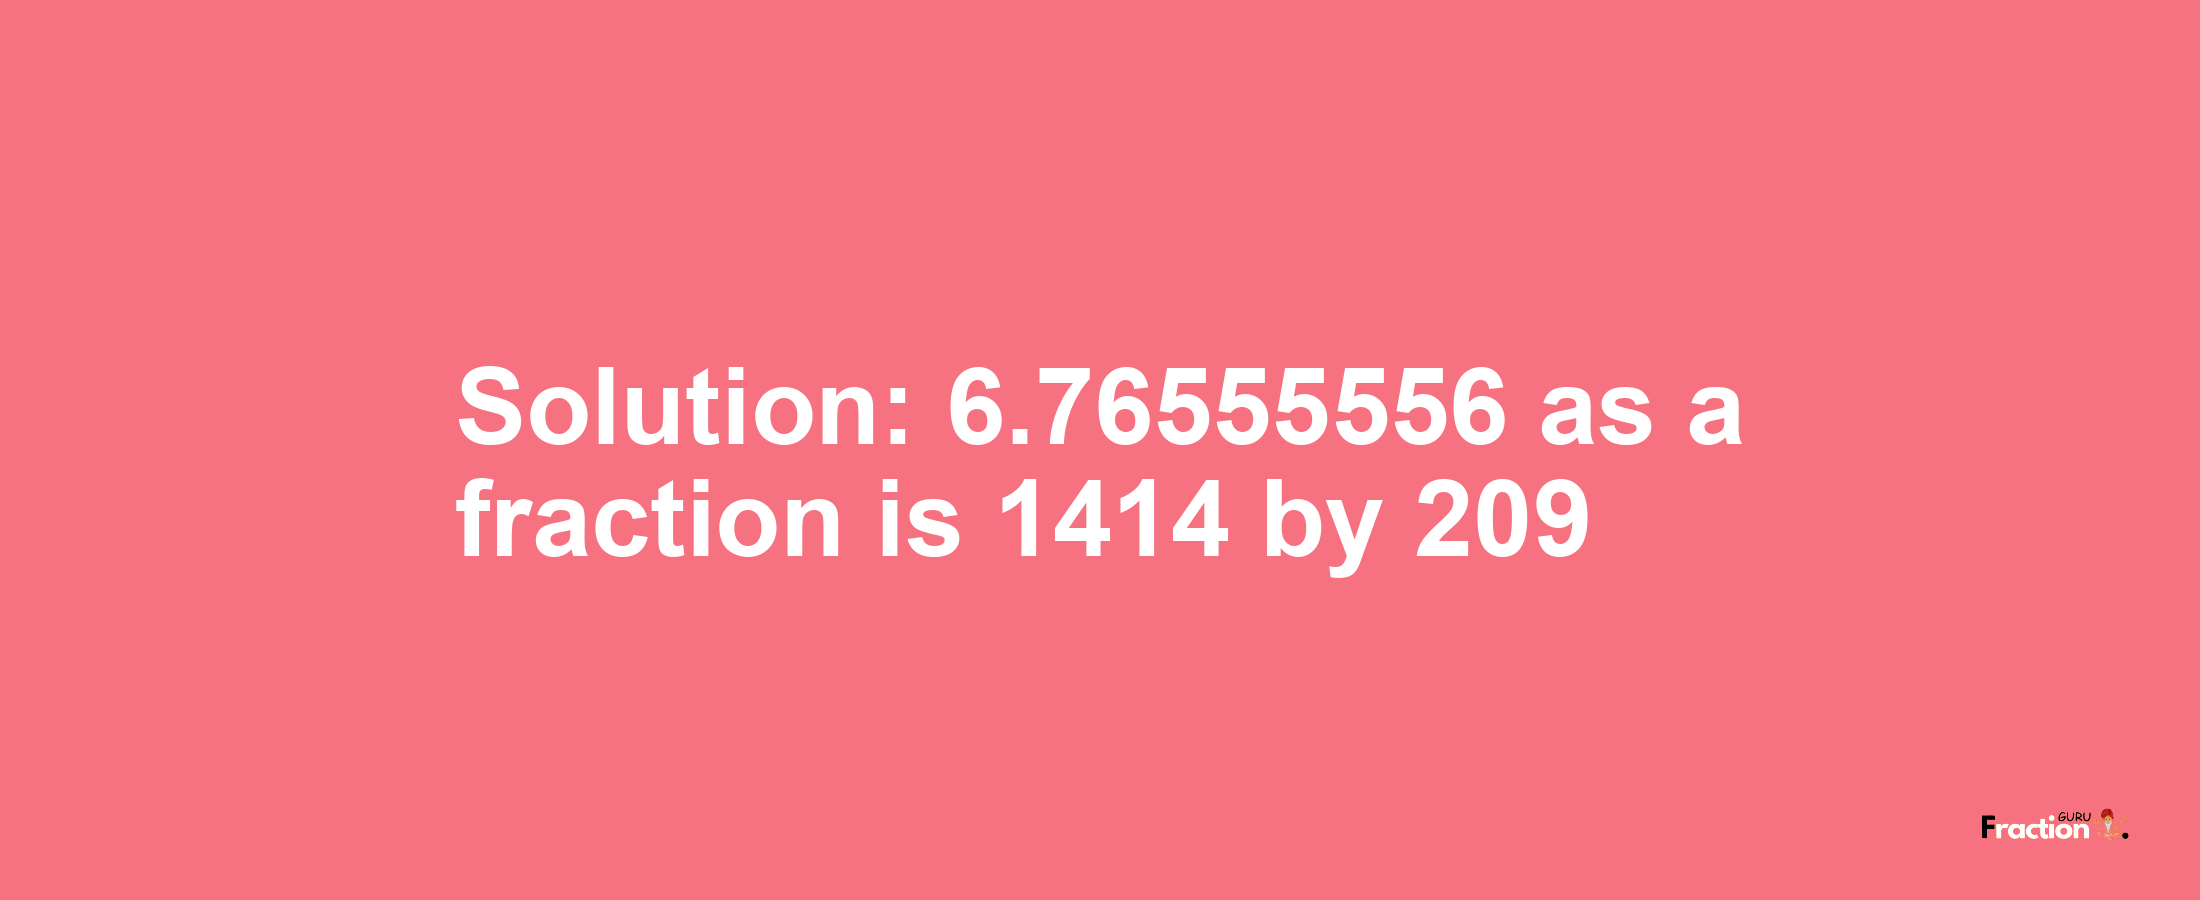 Solution:6.76555556 as a fraction is 1414/209